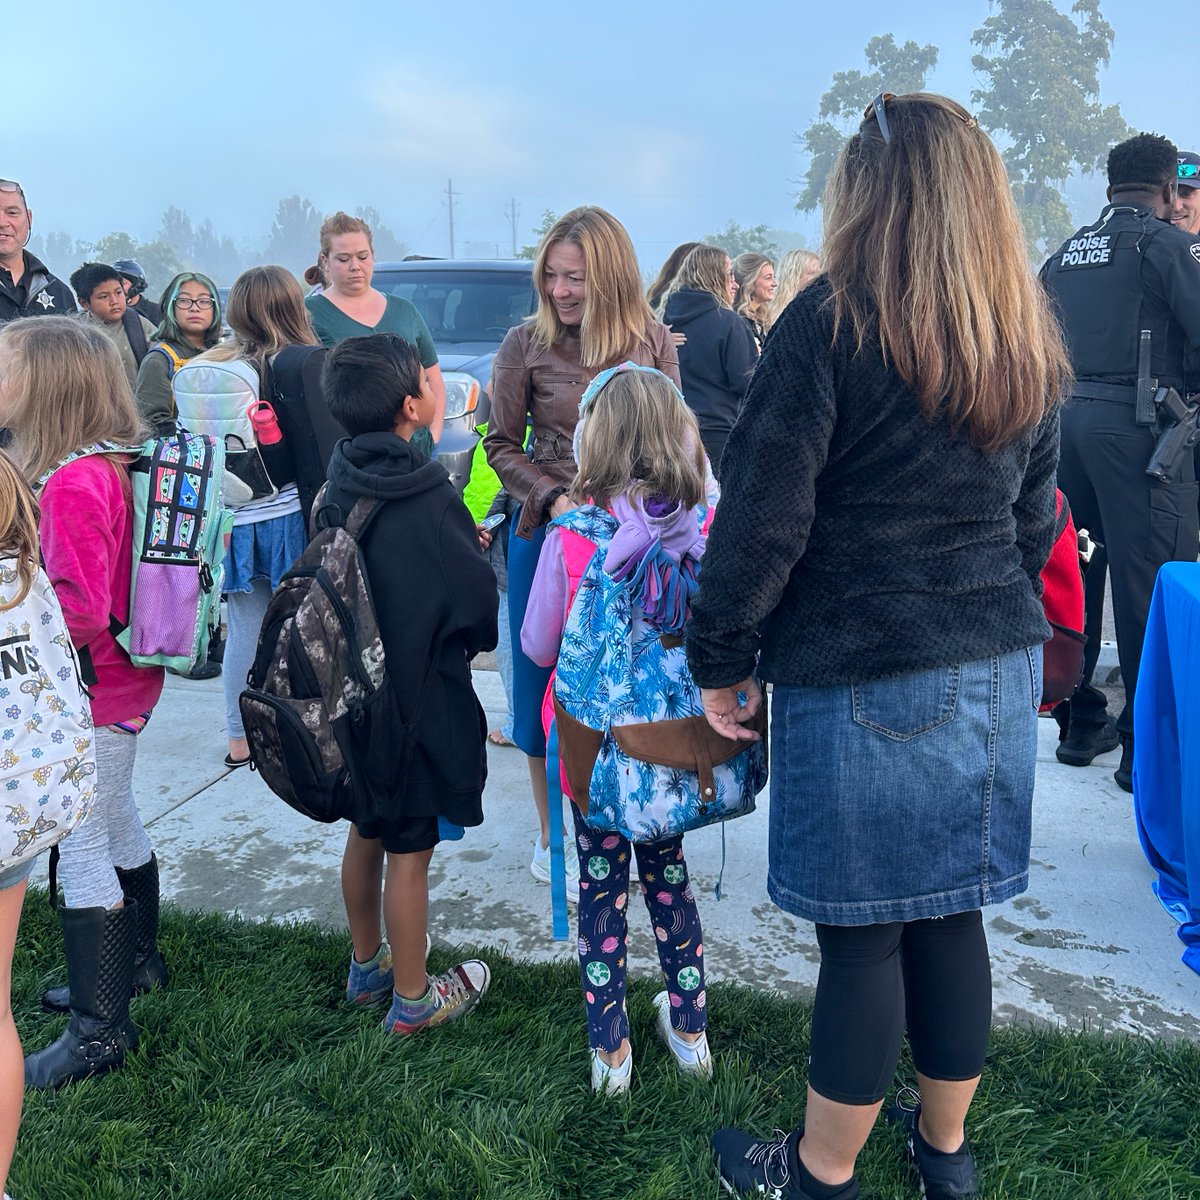 Happy National Walk to School Day, Boise! It is so important that we have parks, pathways and schools for Boiseans to enjoy. I was happy to have a safe, fun walk with my friends at Horizon Elementary this morning.